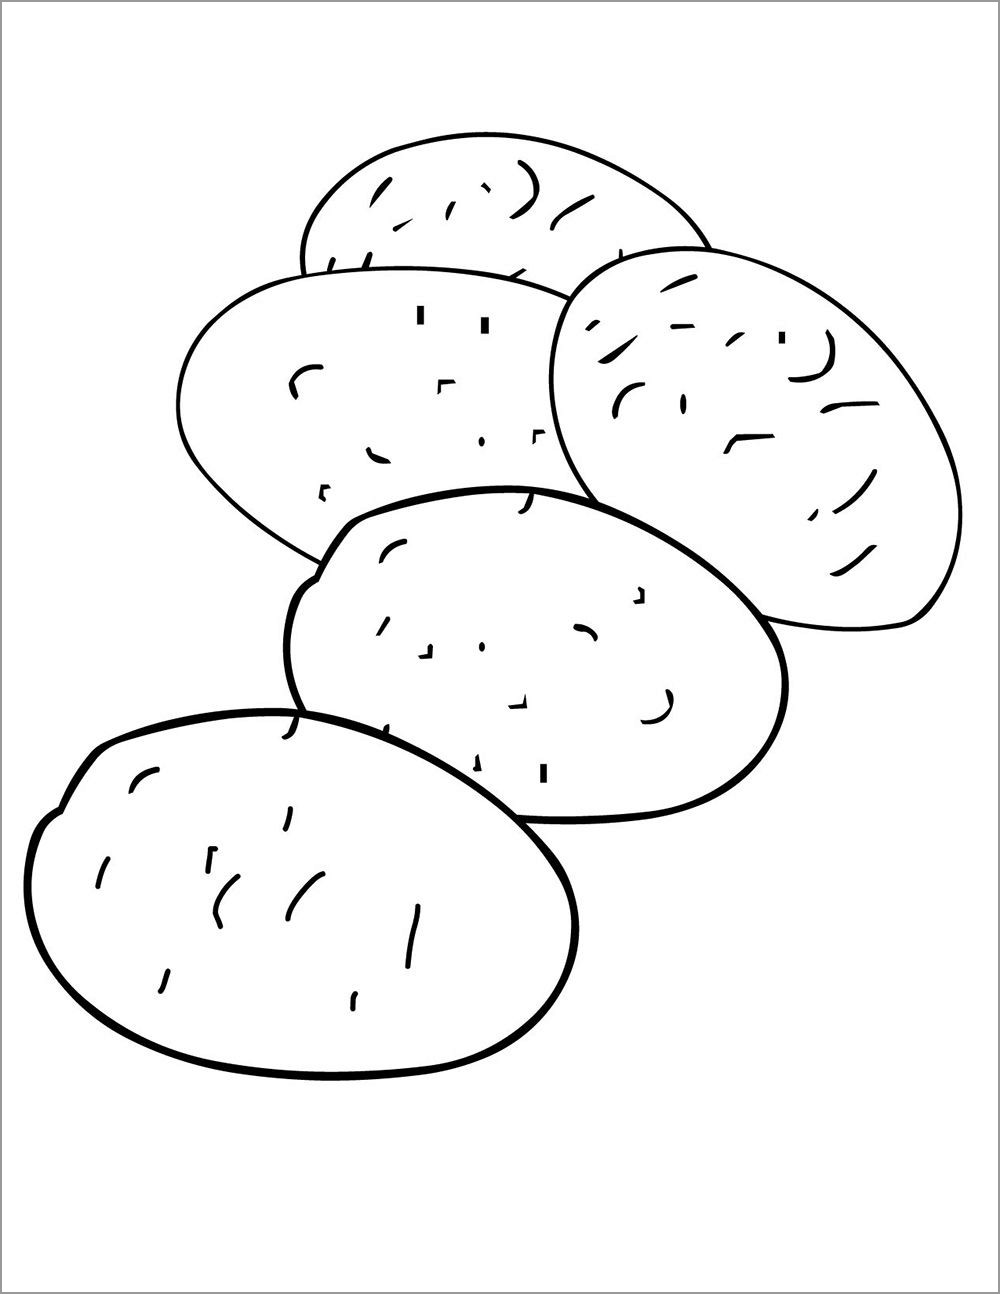 Potatoes Coloring Page for Kids